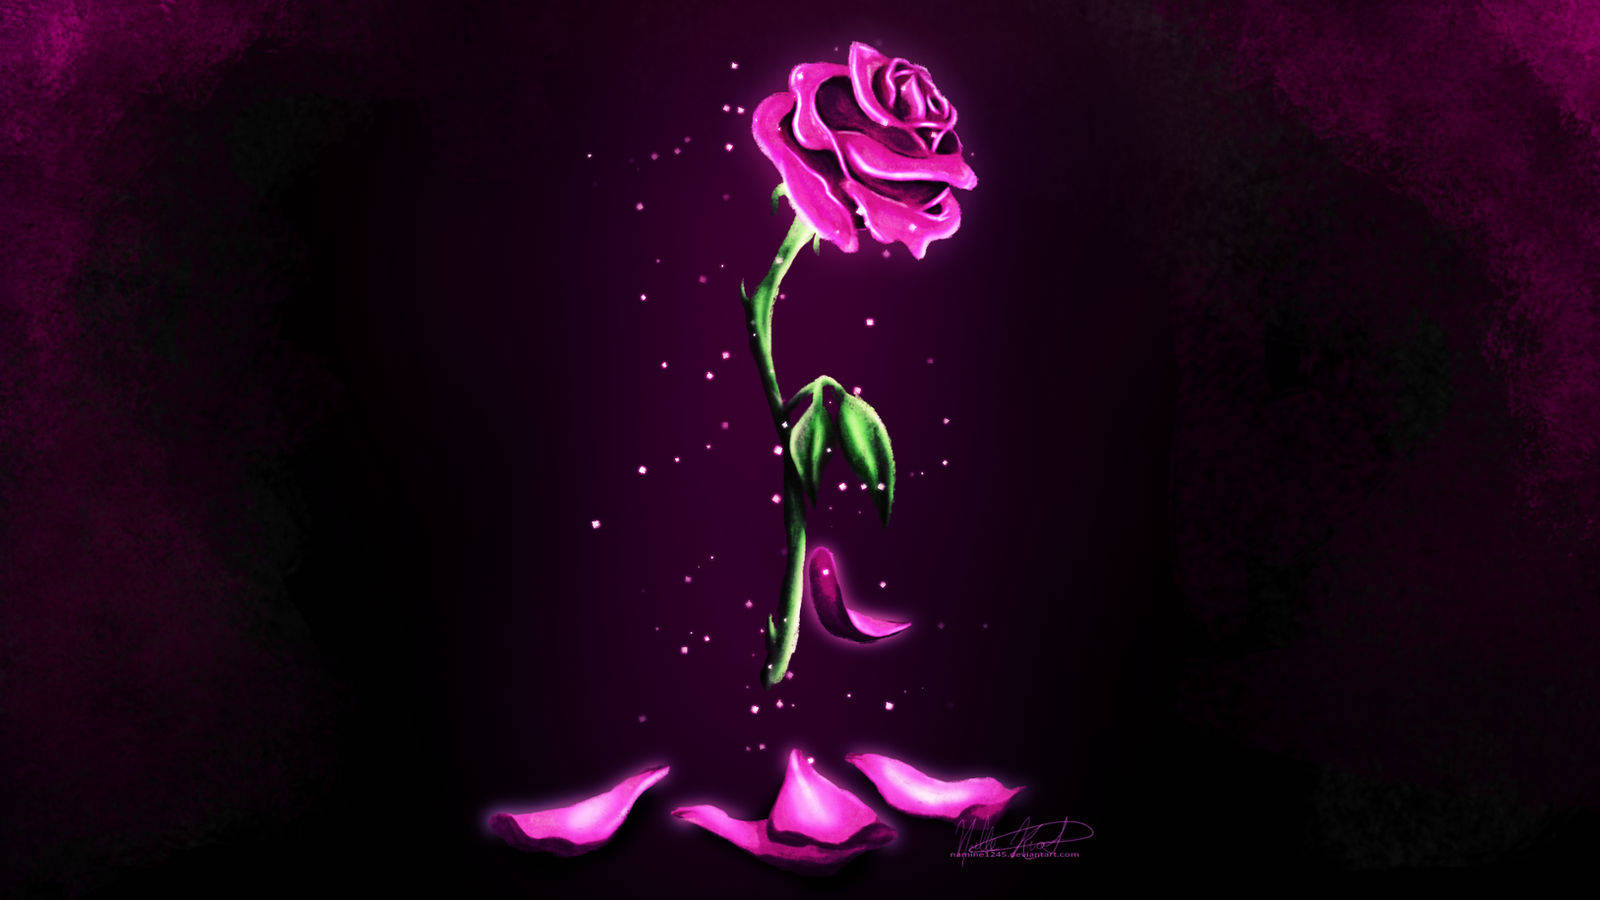 Enchanted Rose Beauty And The Beast Wallpaper